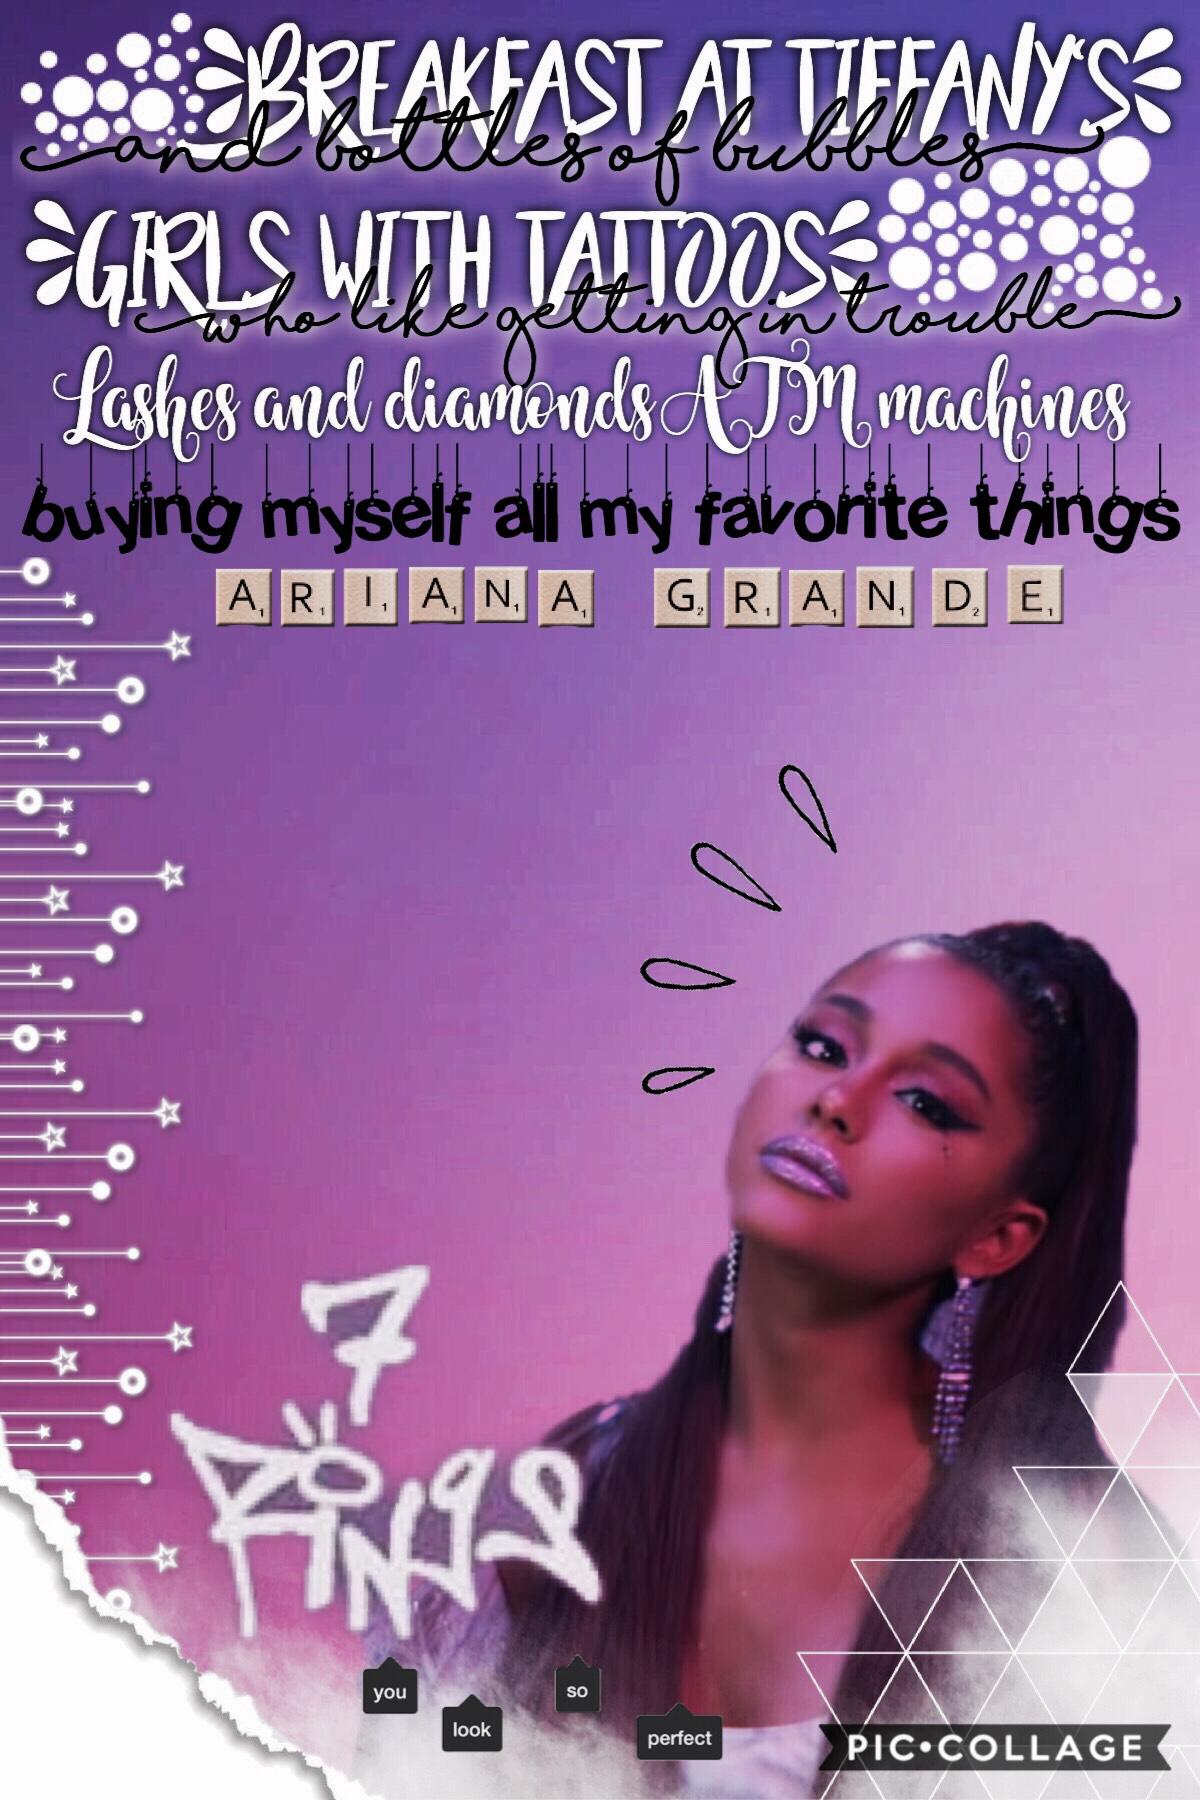 💖Tap💖
If this collage looks familiar, it's because the collage I posted before this (its deleted now) had the wrong lyrics. Anyways, 7 Rings was totally what I didn't expect it to be!!!